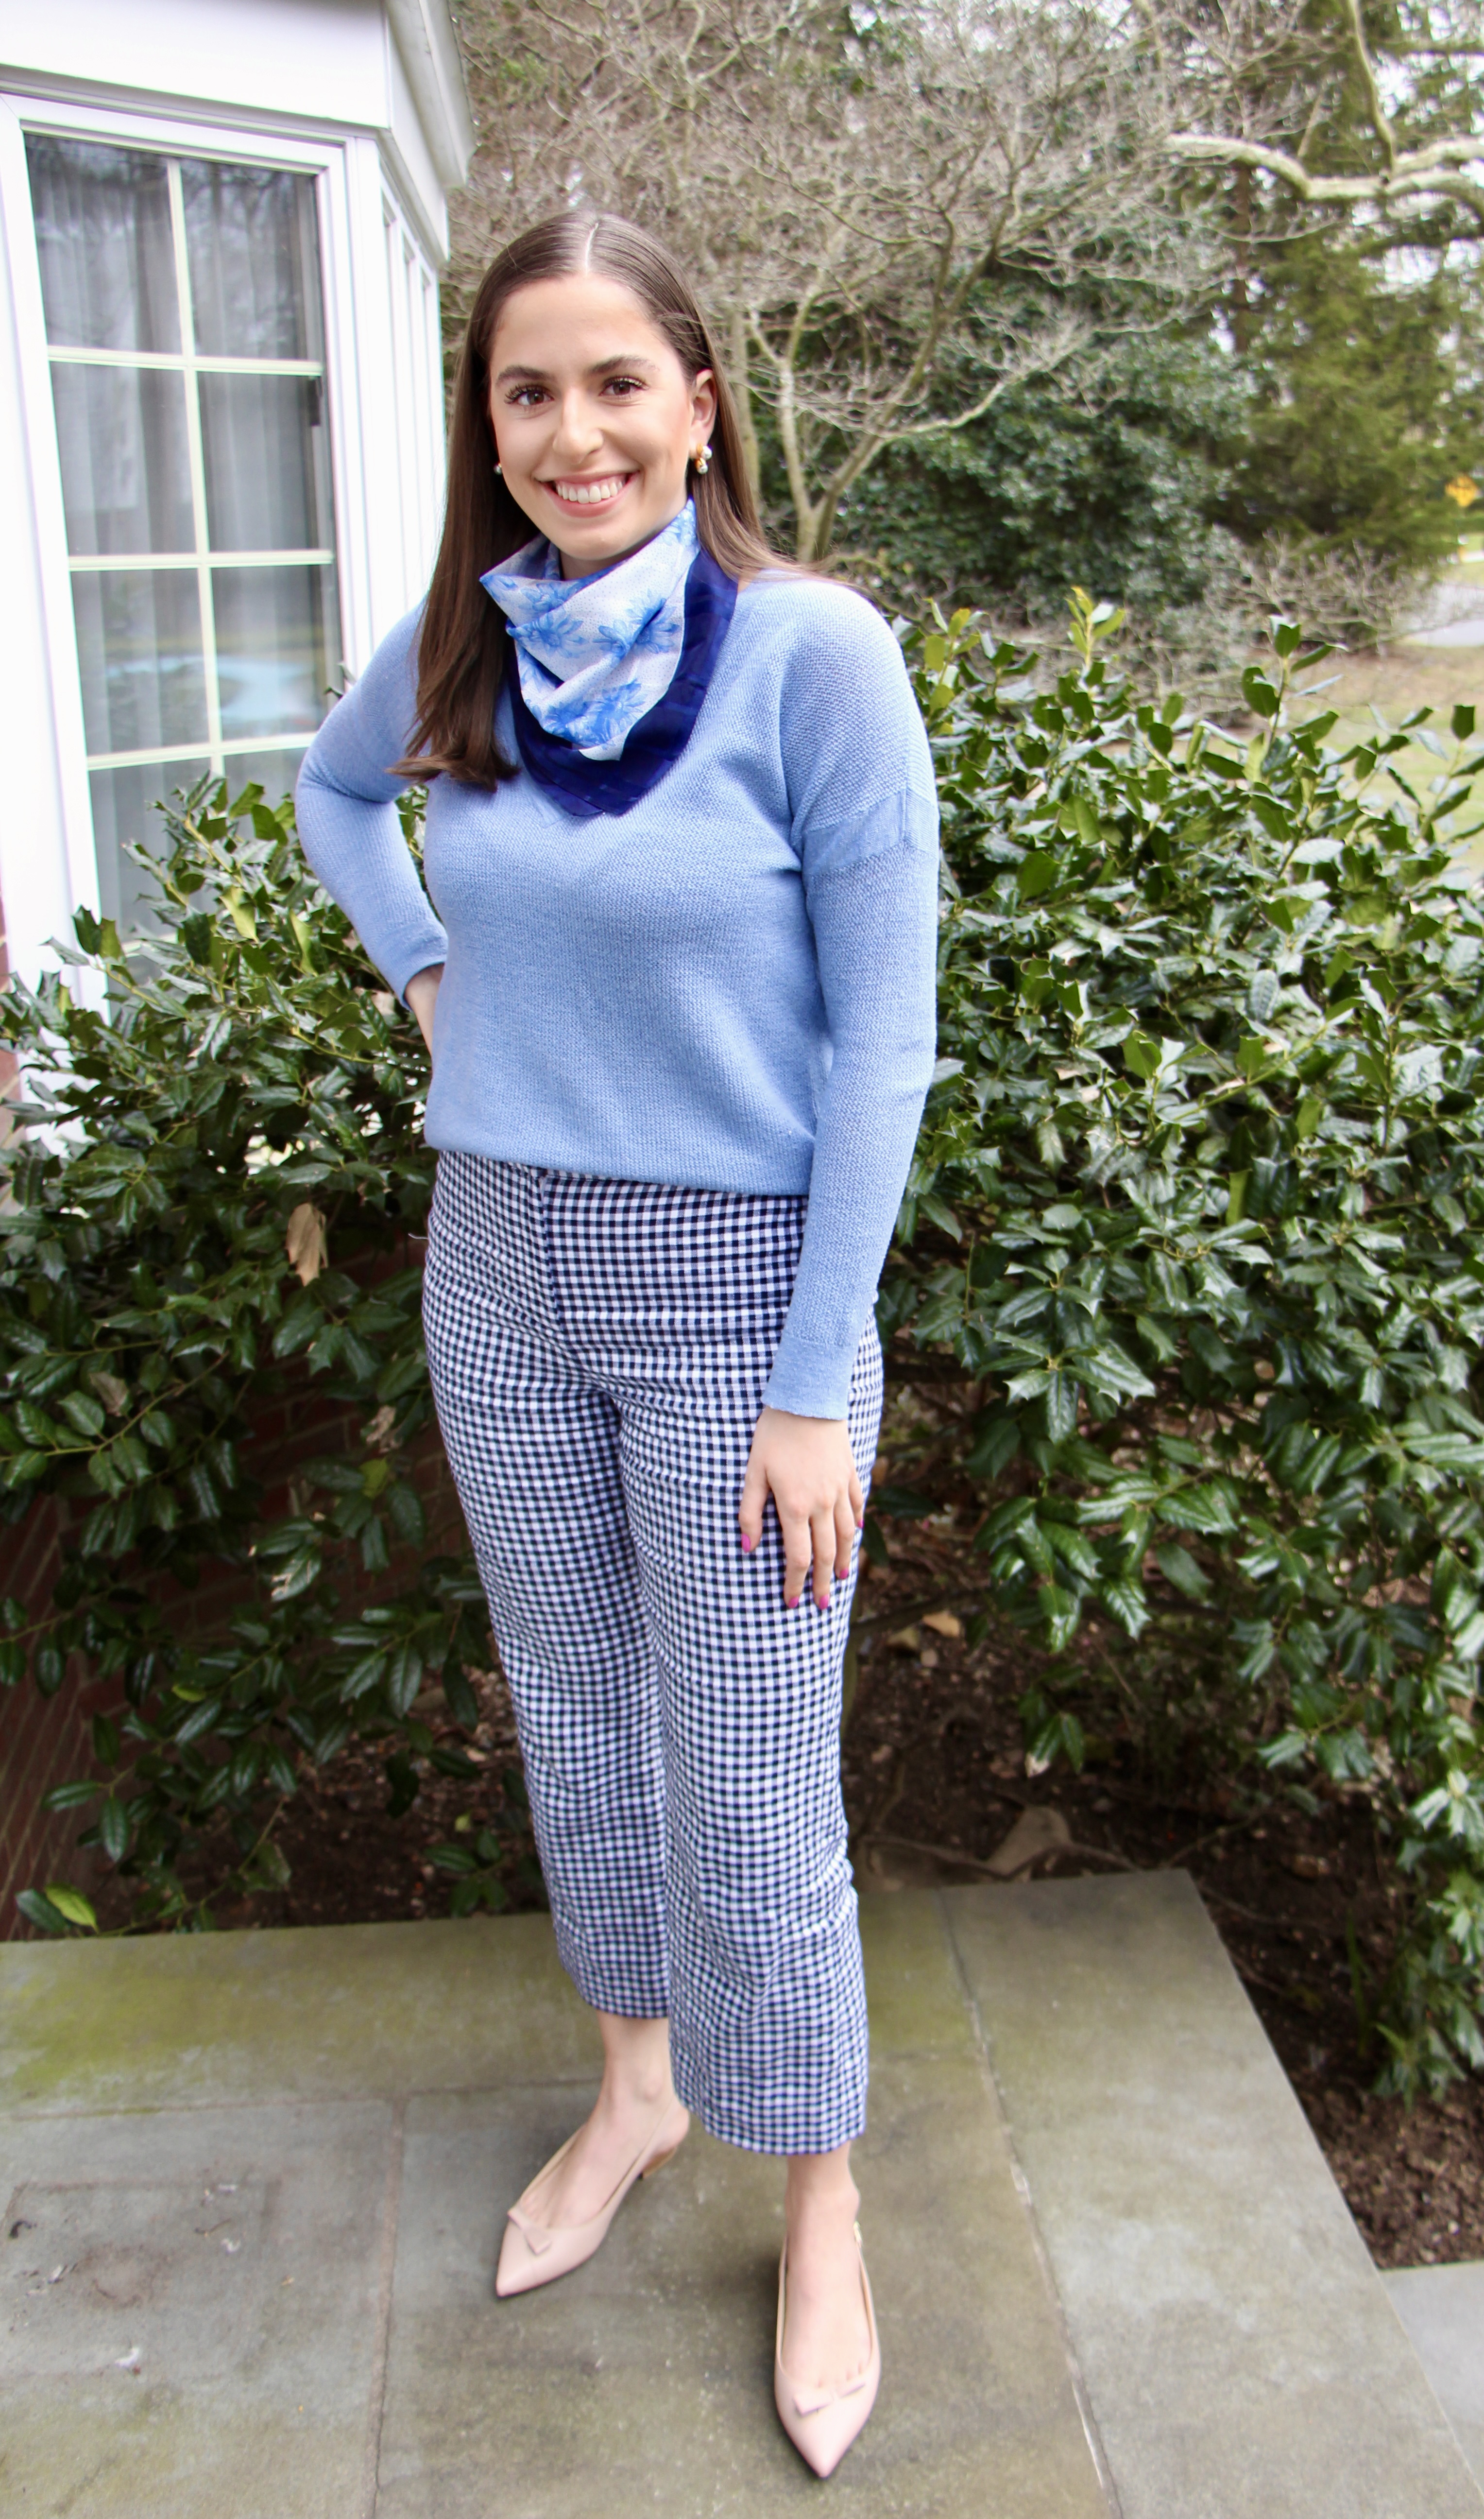 law school, english majors, college major, wake forest university, gingham pants, gingham, sarah flint, slingback, nude mules, silk scarf, blue sweater, silk scarf, floral scarf